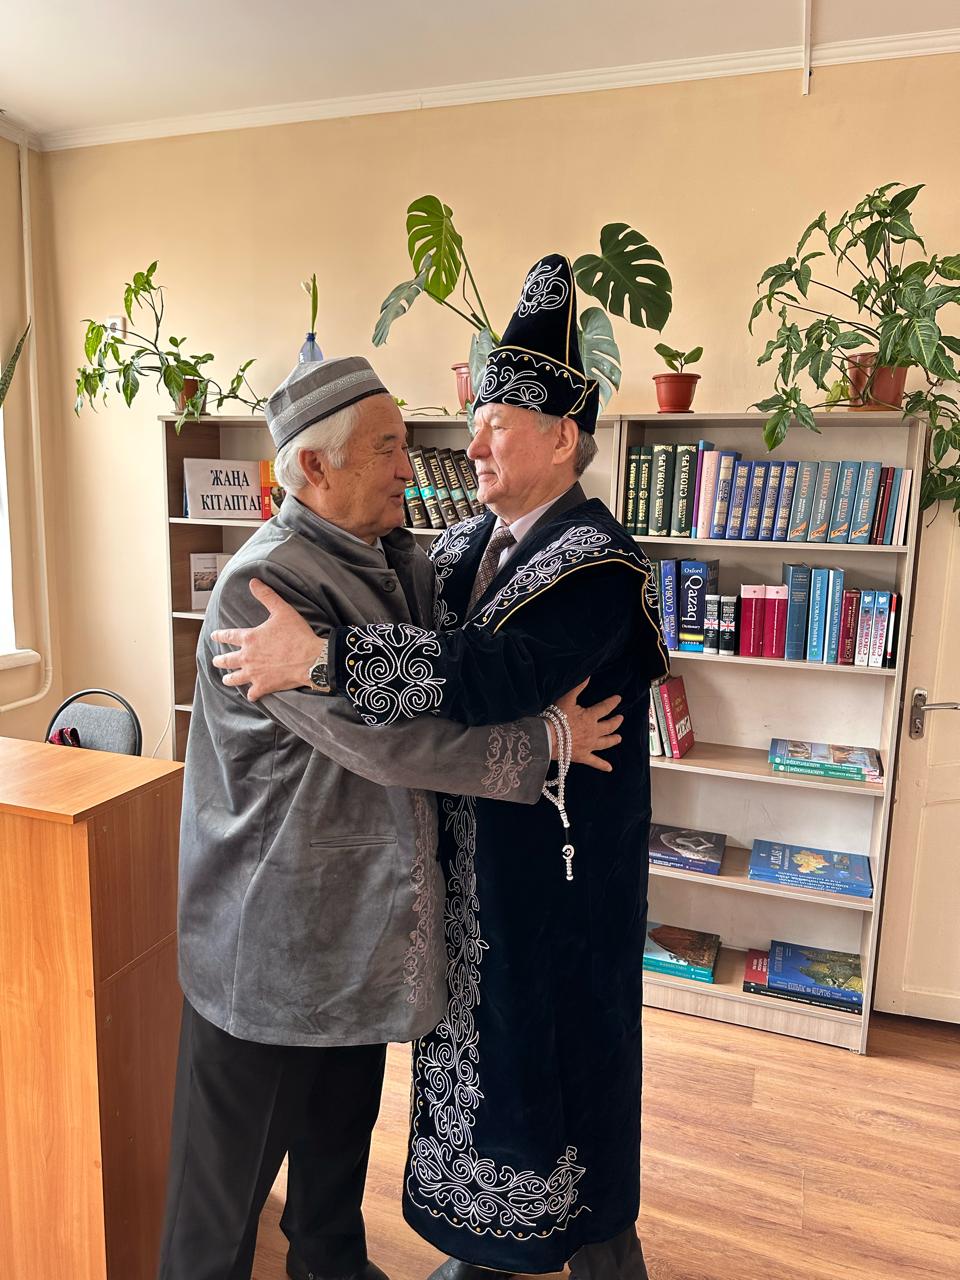 The staff of the Agrarian Faculty celebrated the National Day of the Kazakh people - Meeting Day